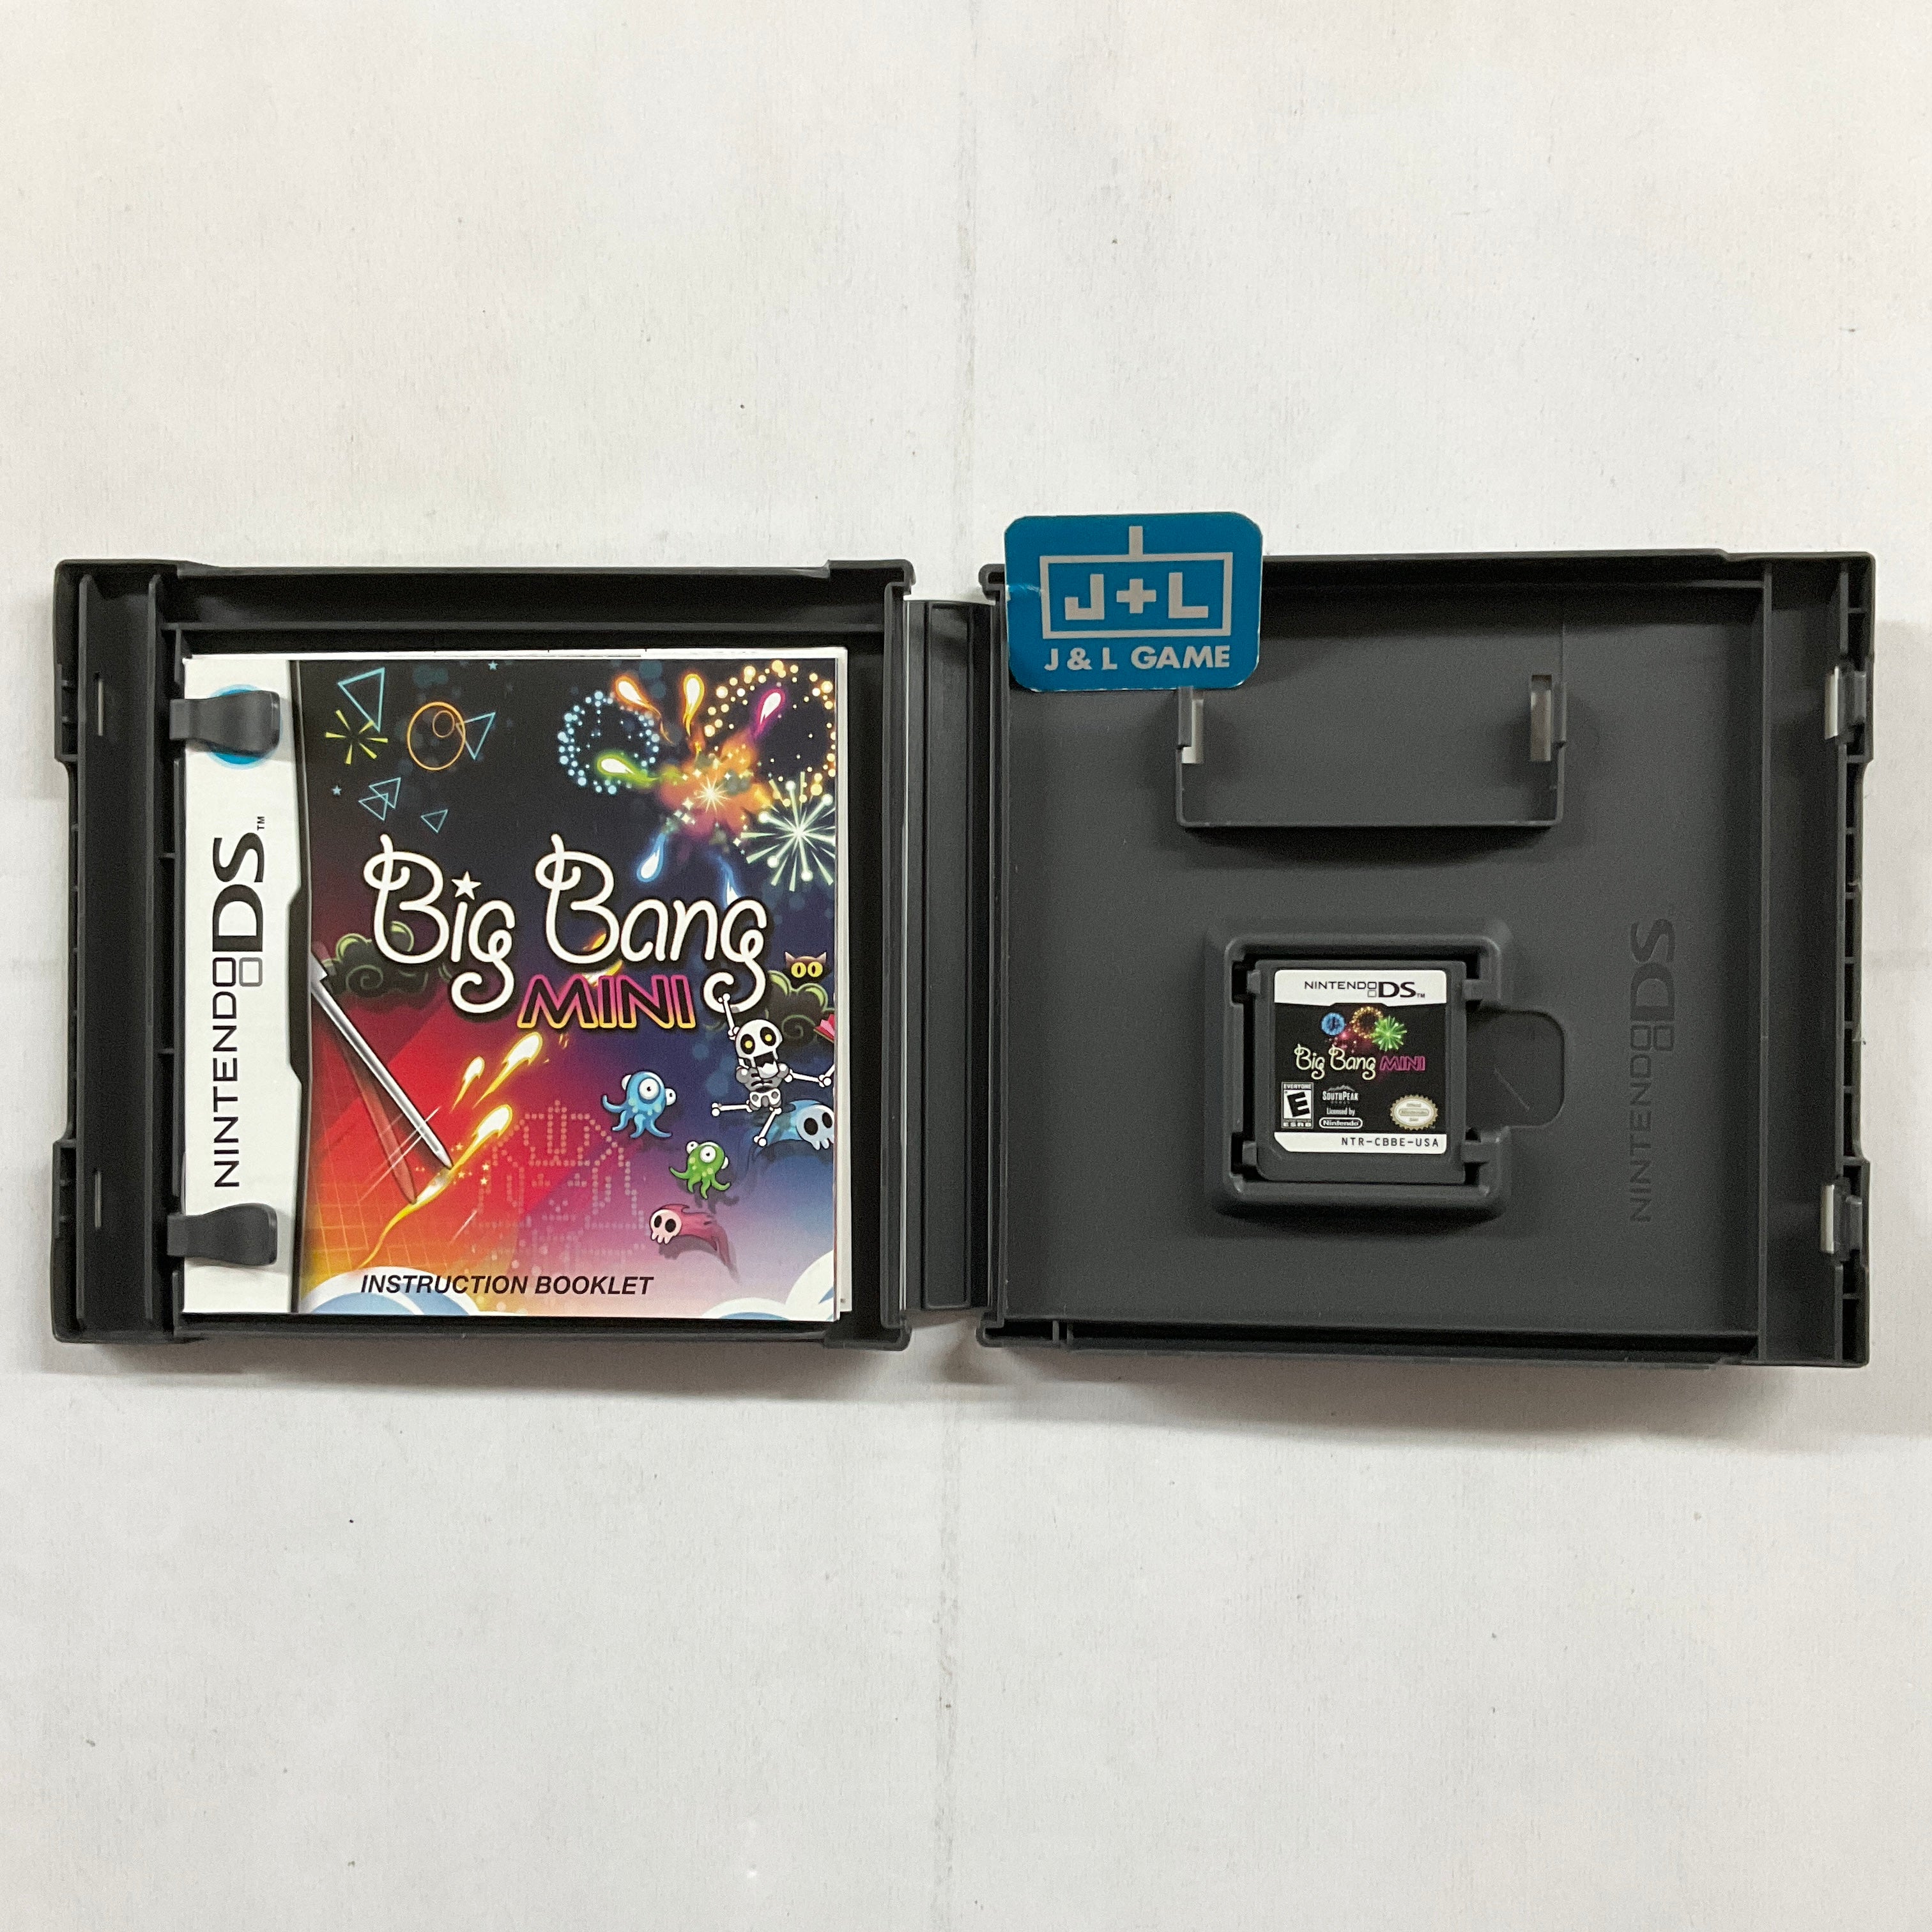 Big Bang Mini - (NDS) Nintendo DS [Pre-Owned] Video Games SouthPeak Games   